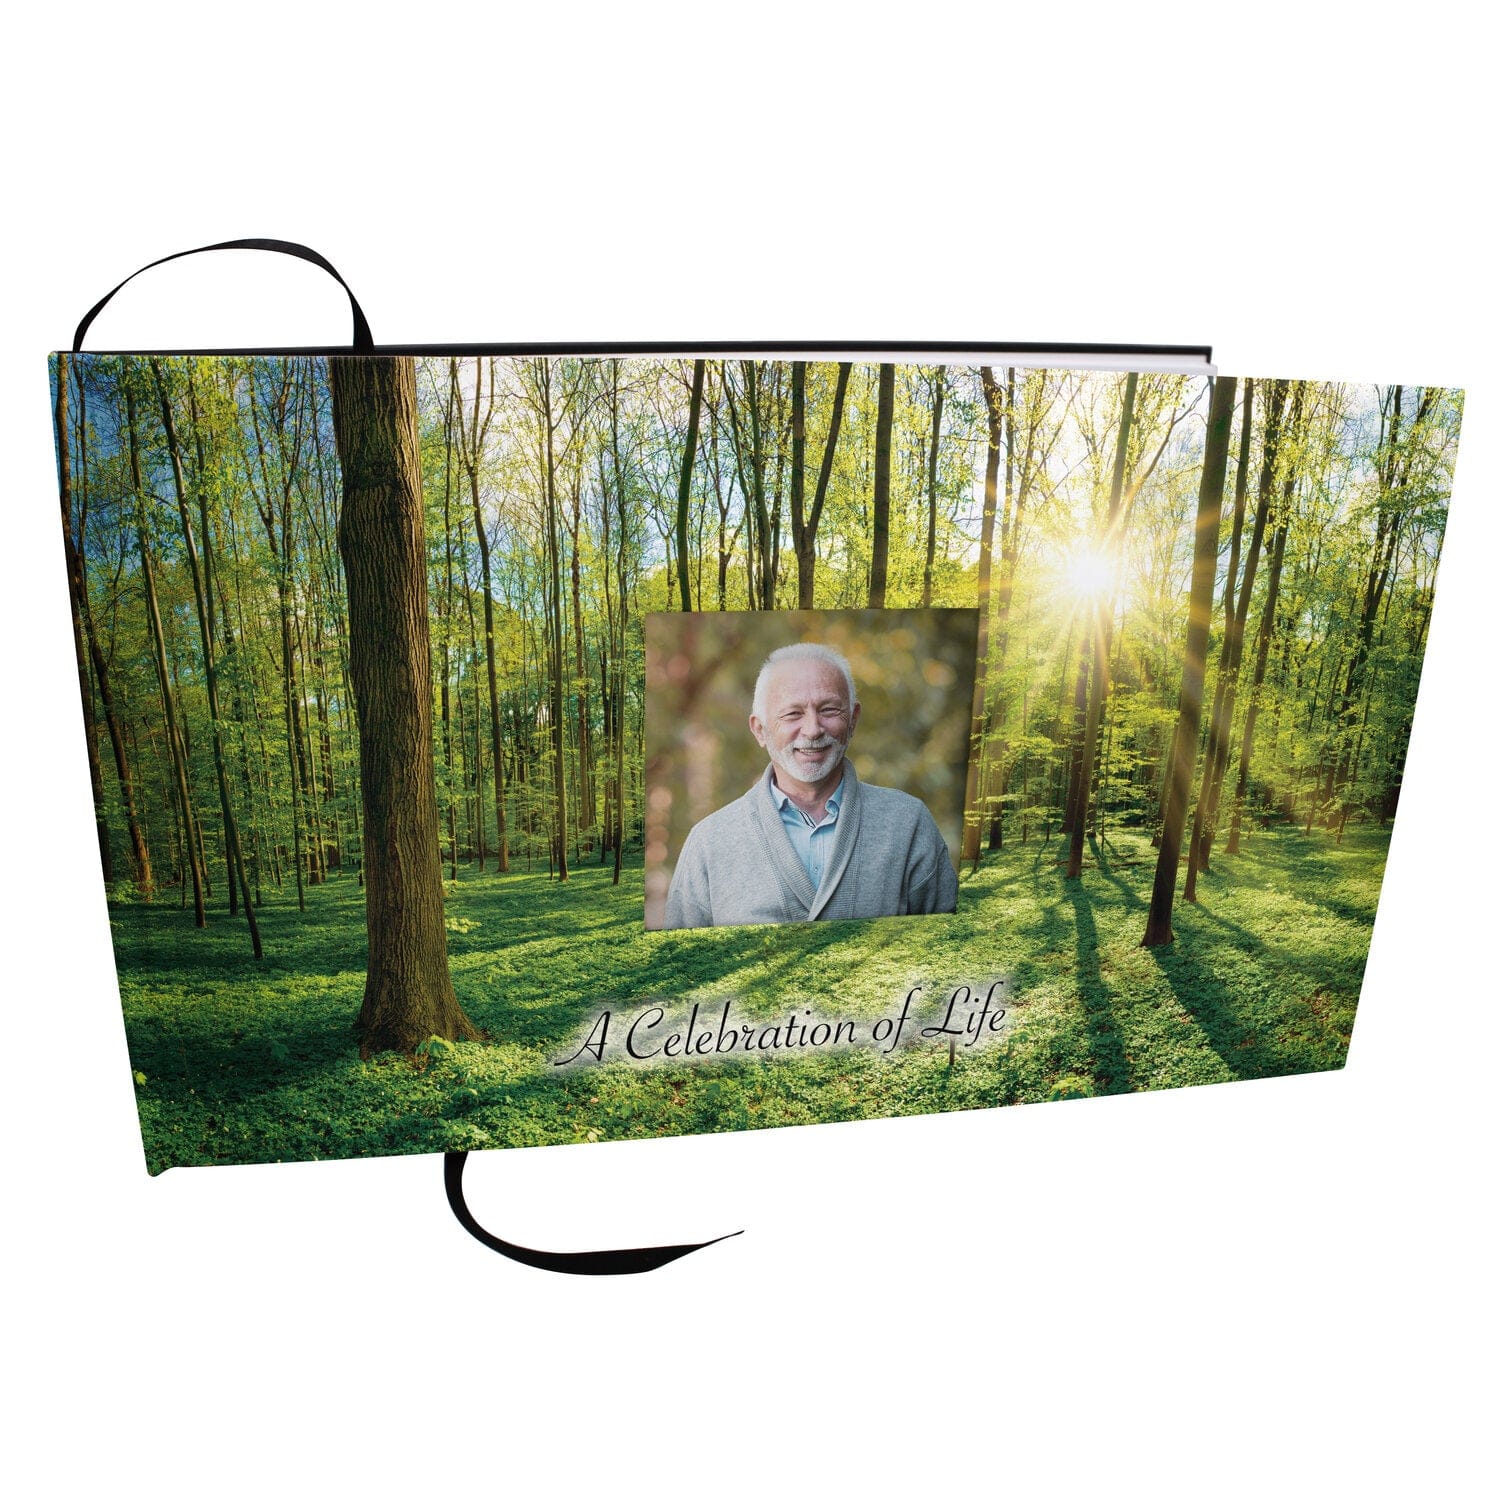 Commemorative Cremation Urns Emerald Forest Matching Themed 'Celebration of Life' Guest Book for Funeral or Memorial Service